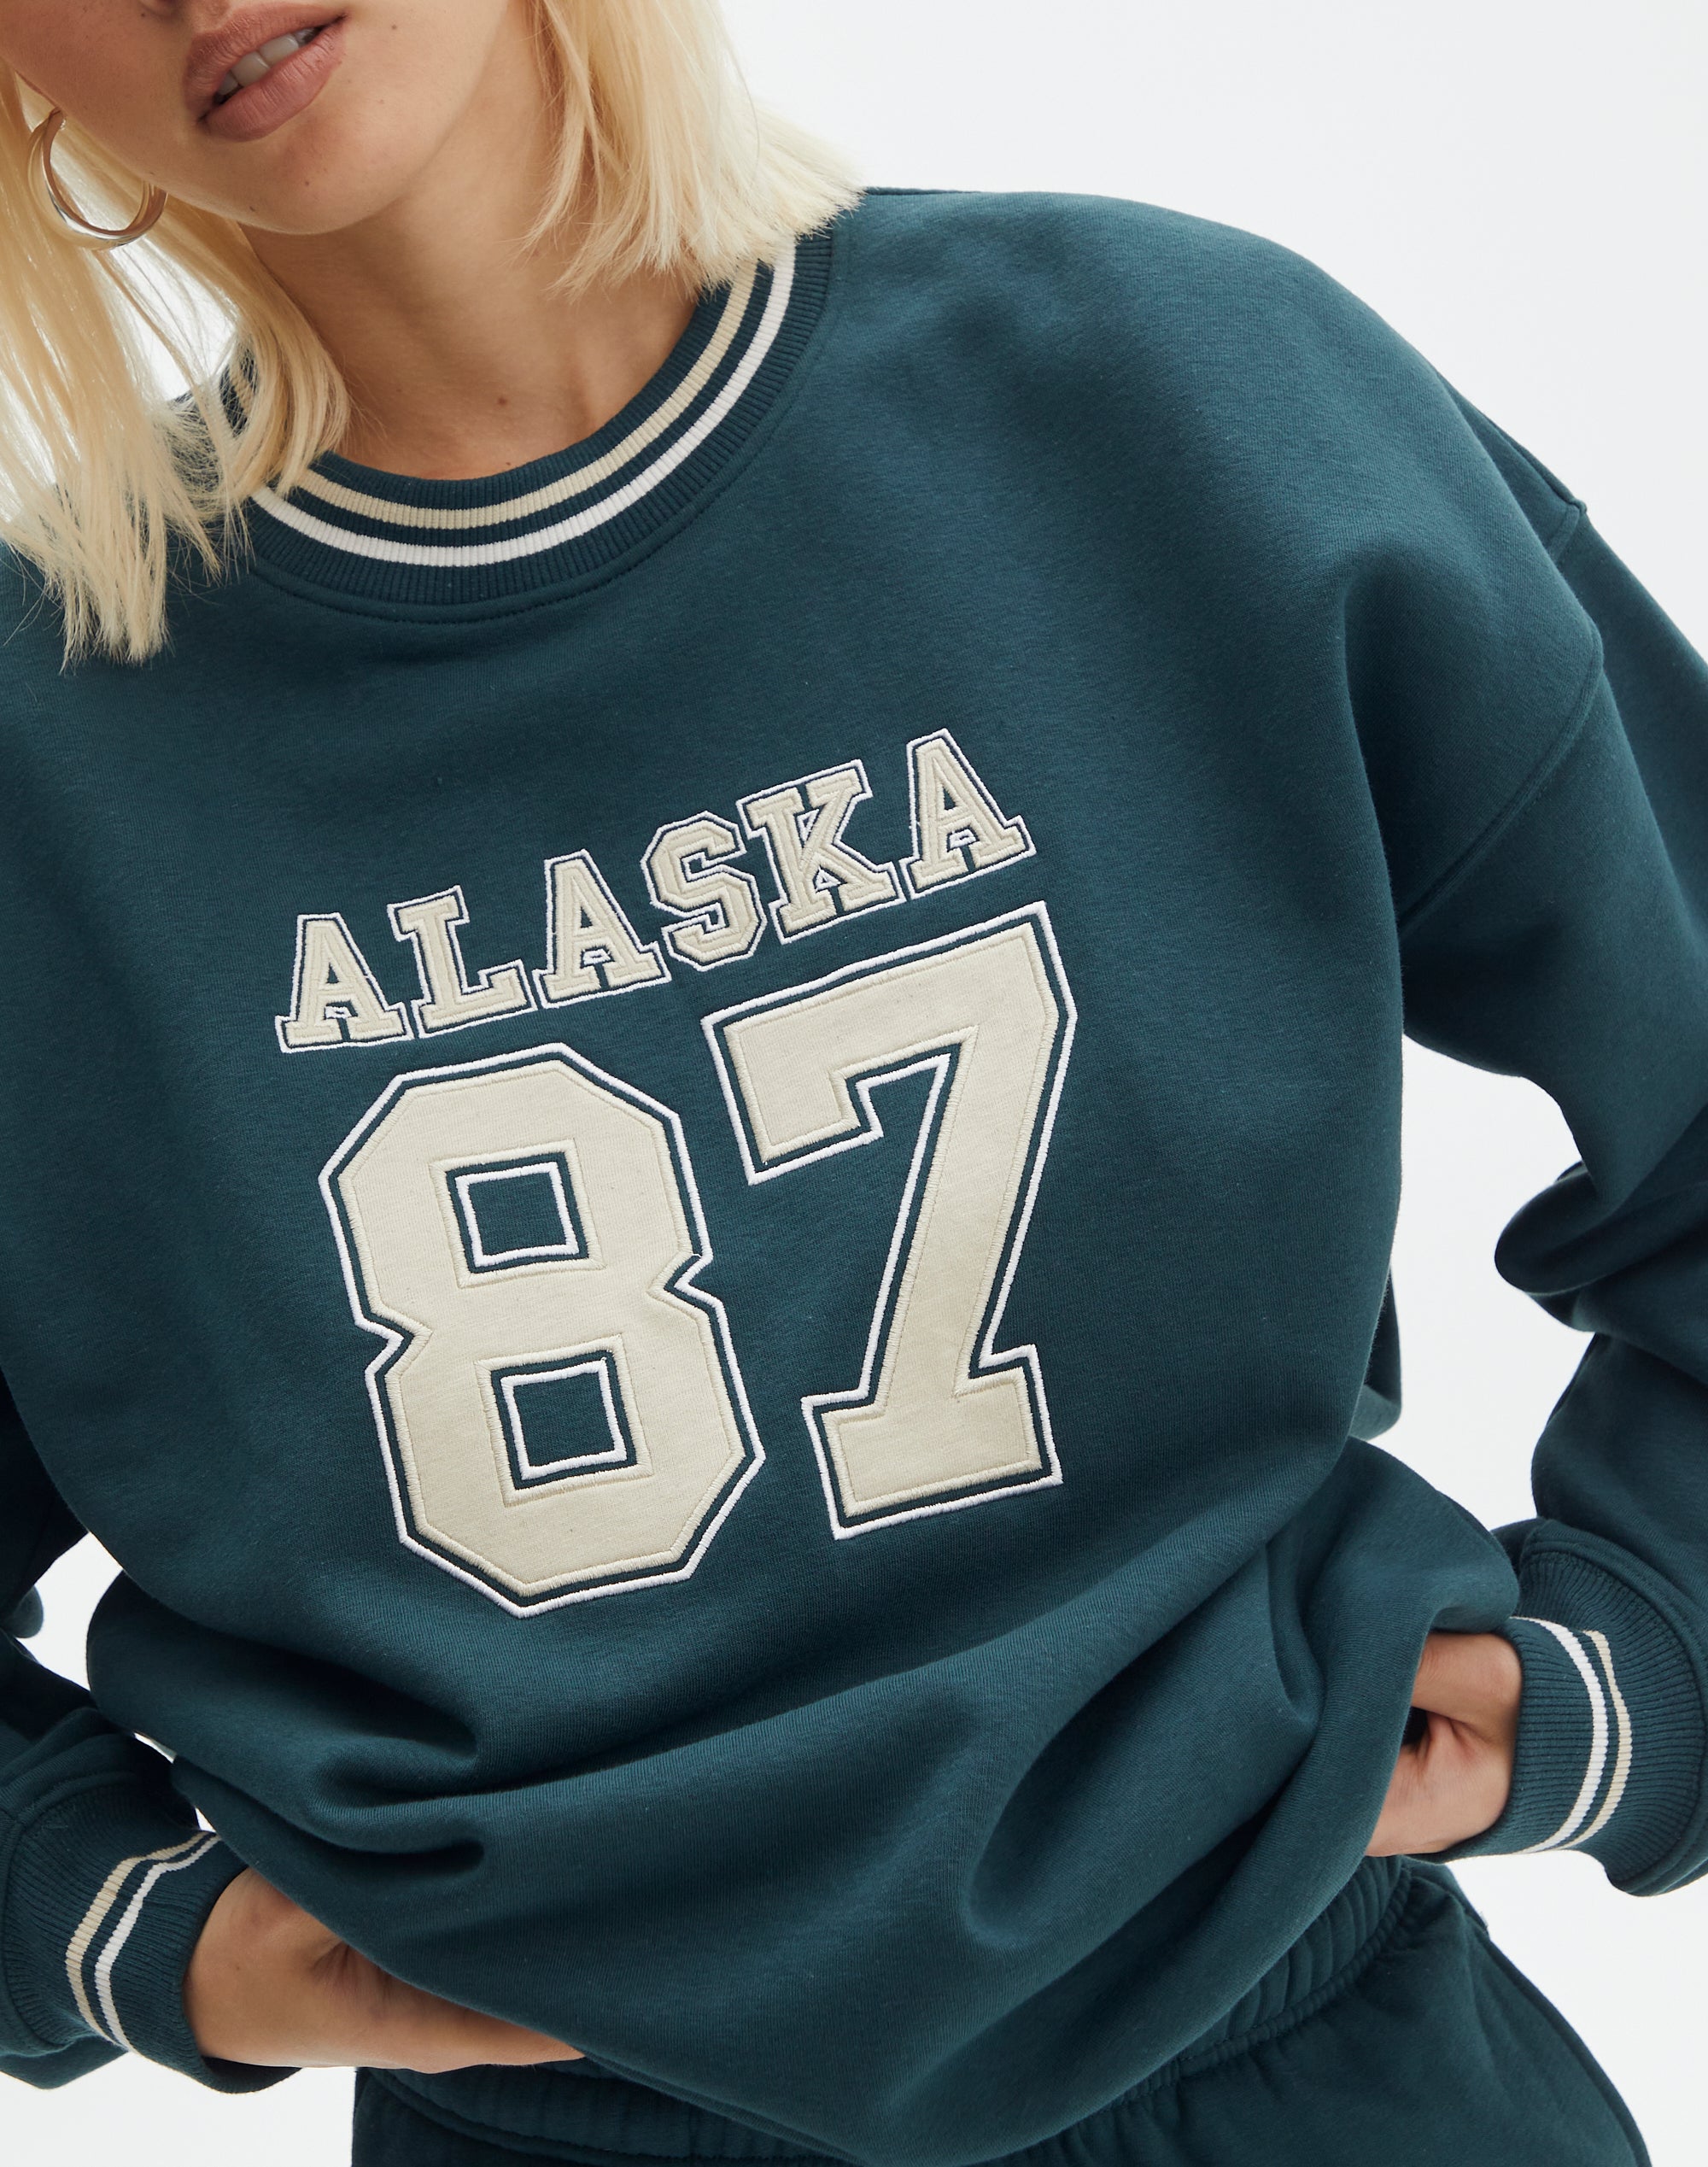 Embroidered Crew Neck Jumper in Alaska/ Ivy League